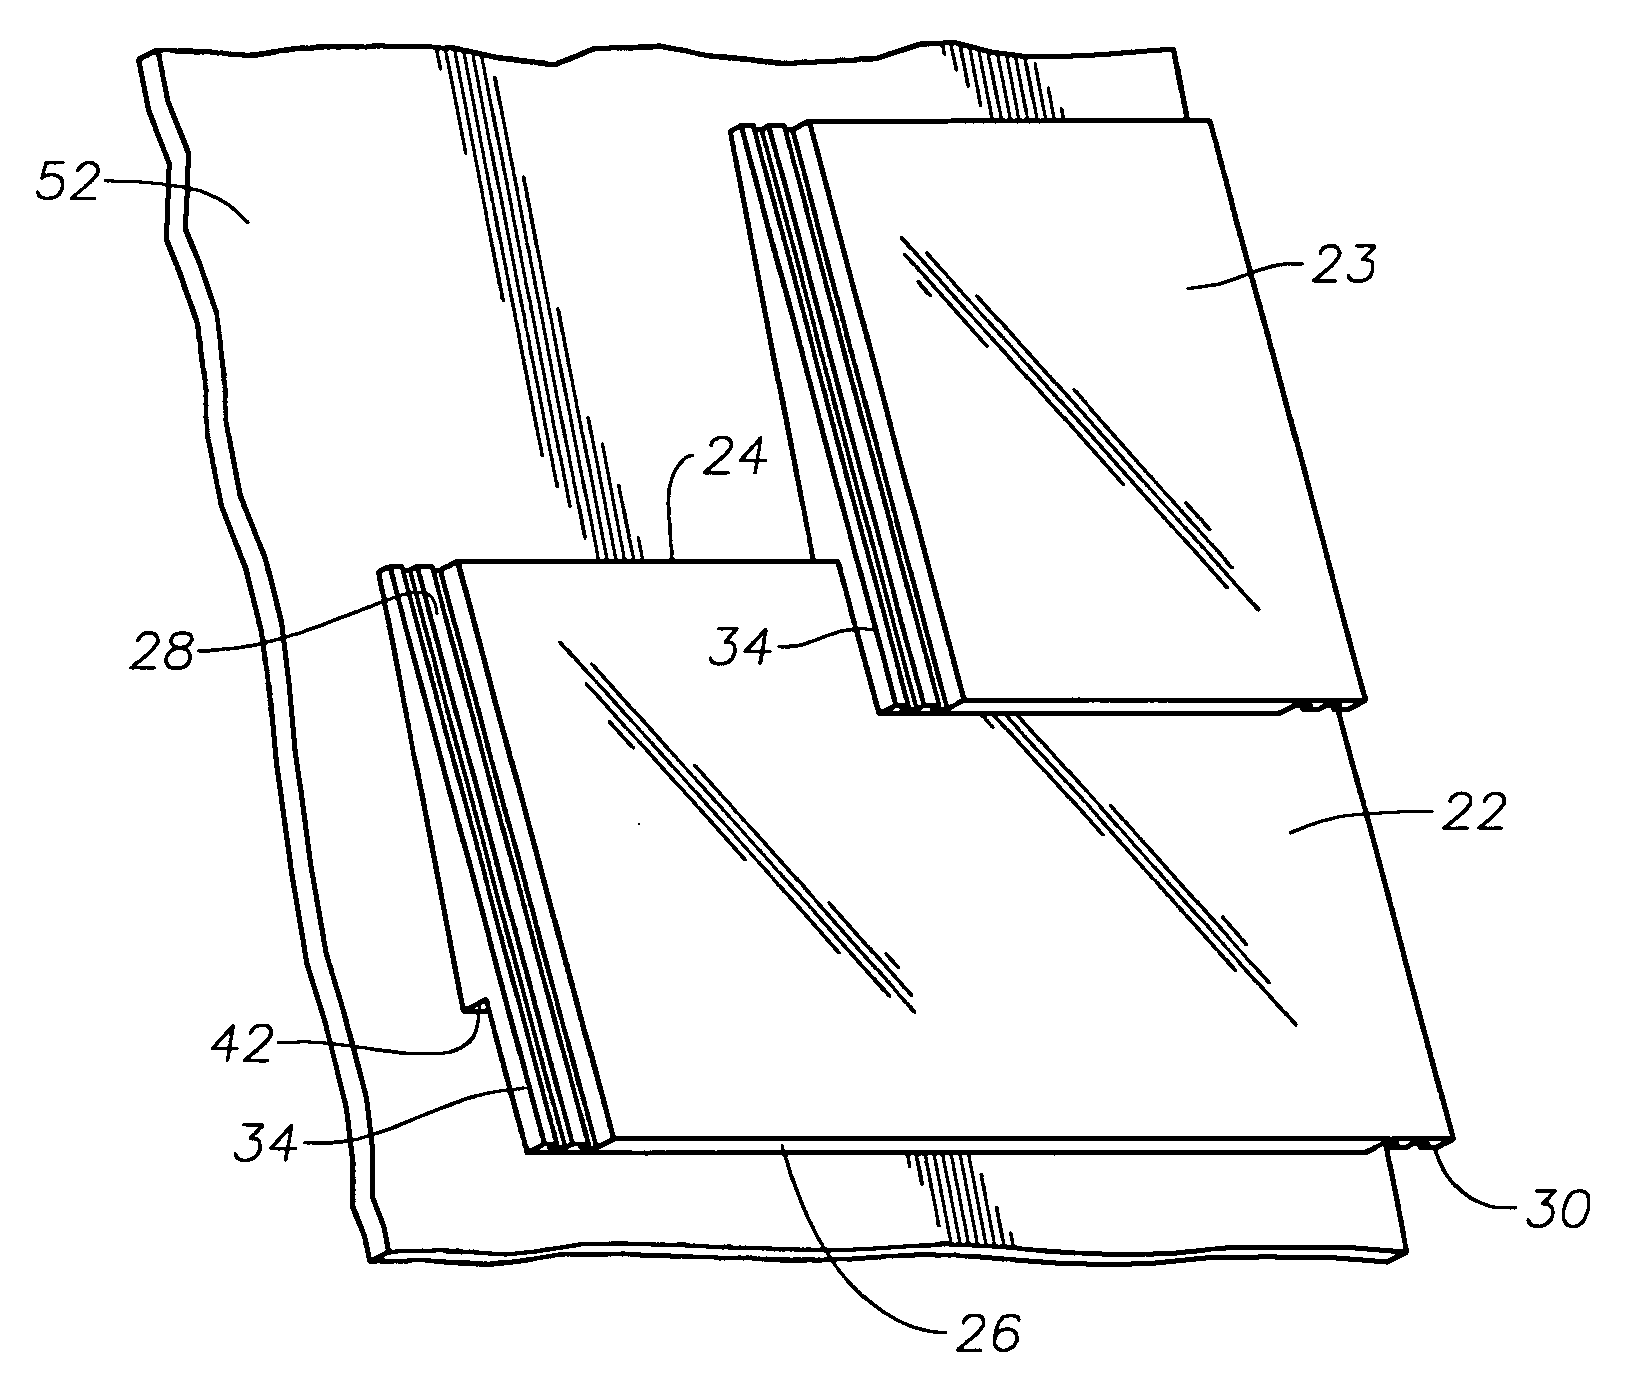 Insulated pitched roof system and method of installing same